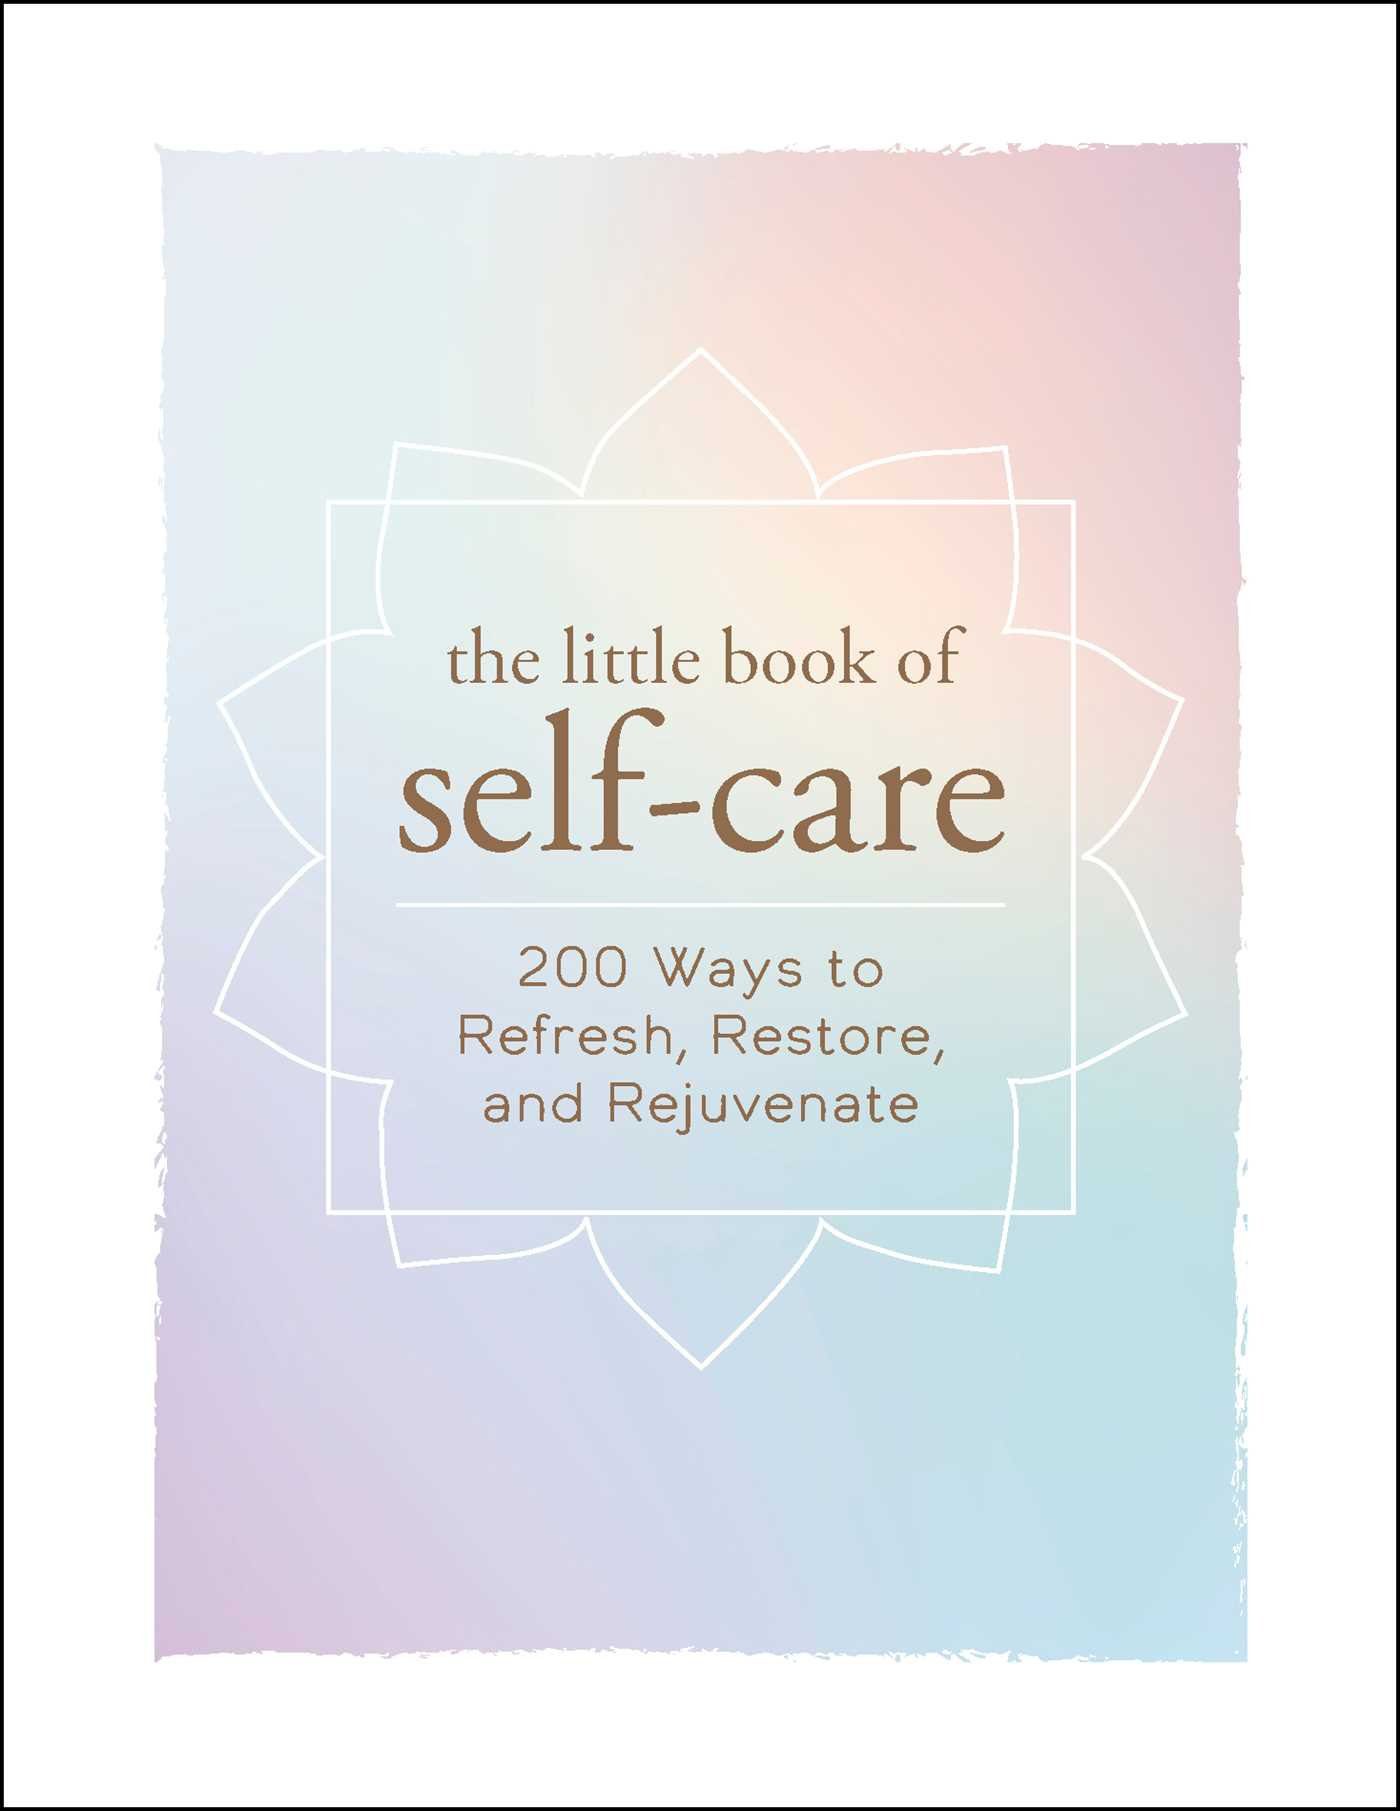 The little book of Self-care